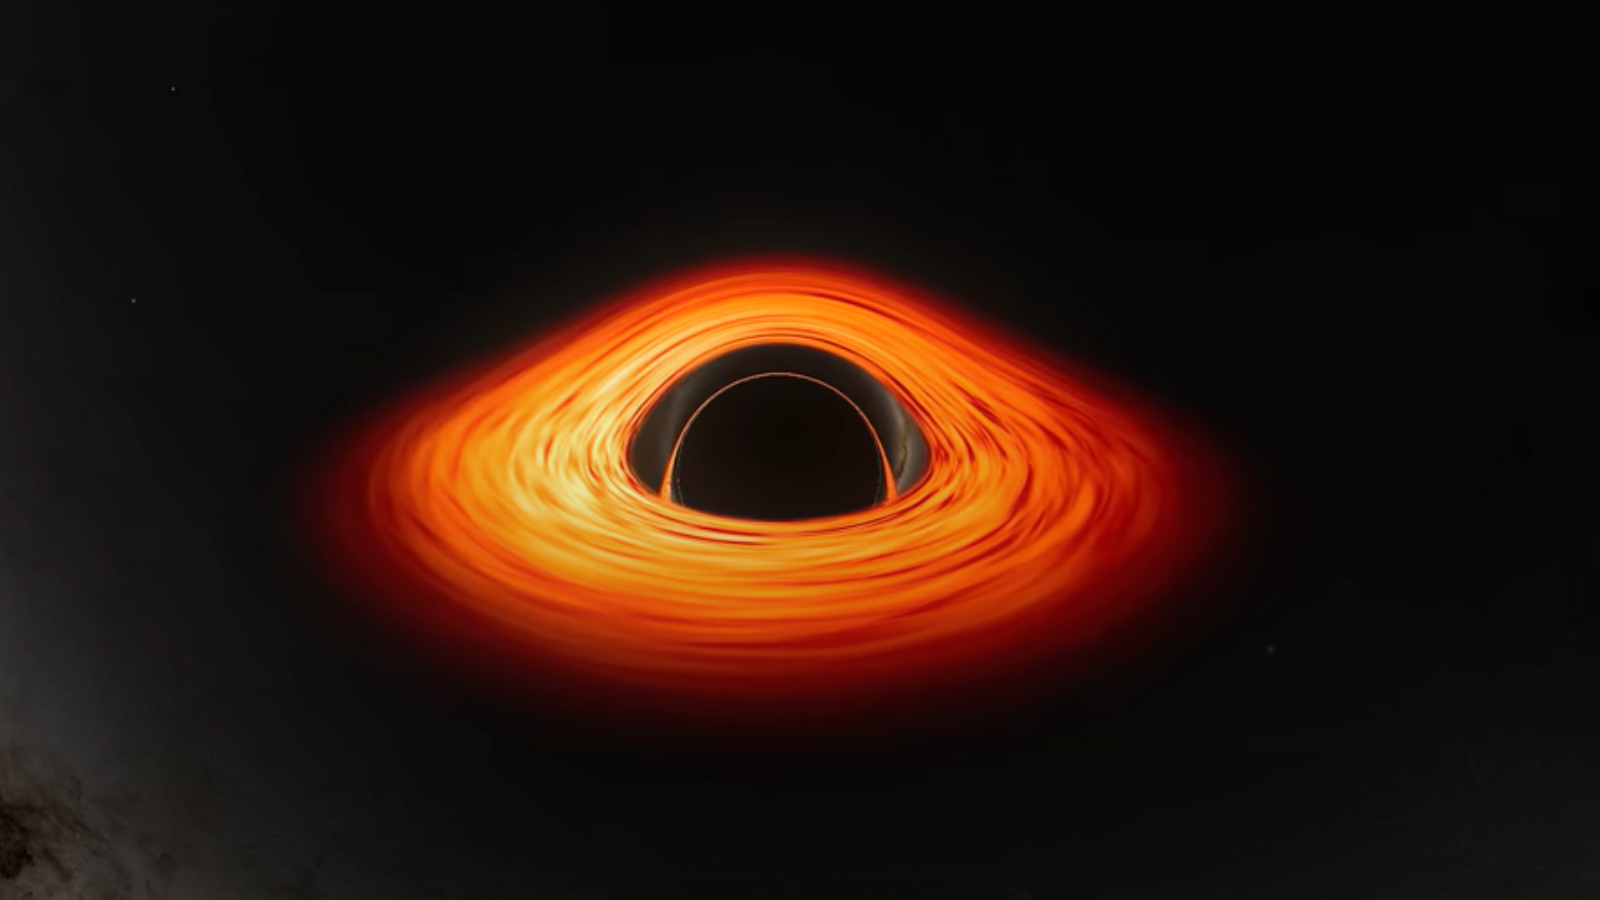 Fall into a black hole in mind-bending NASA animation (video) Space